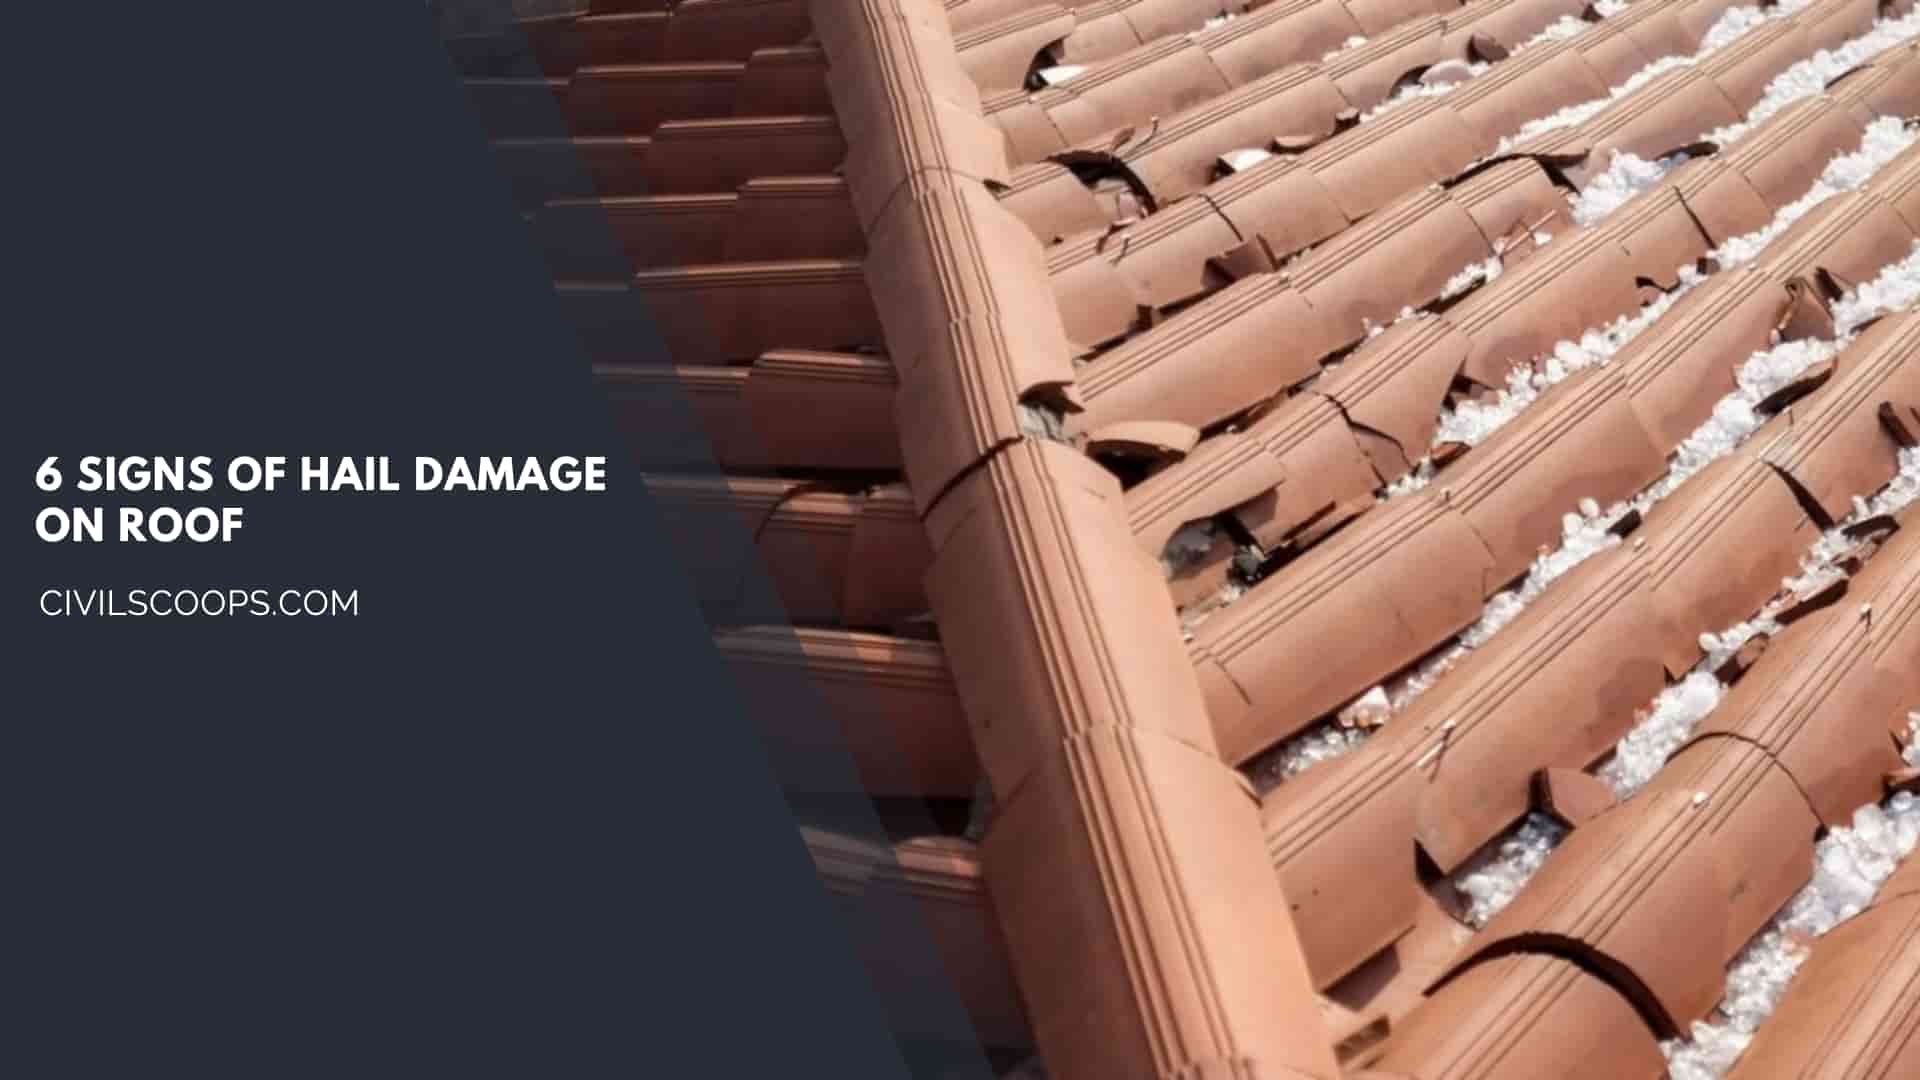 6 Signs of Hail Damage on Roof